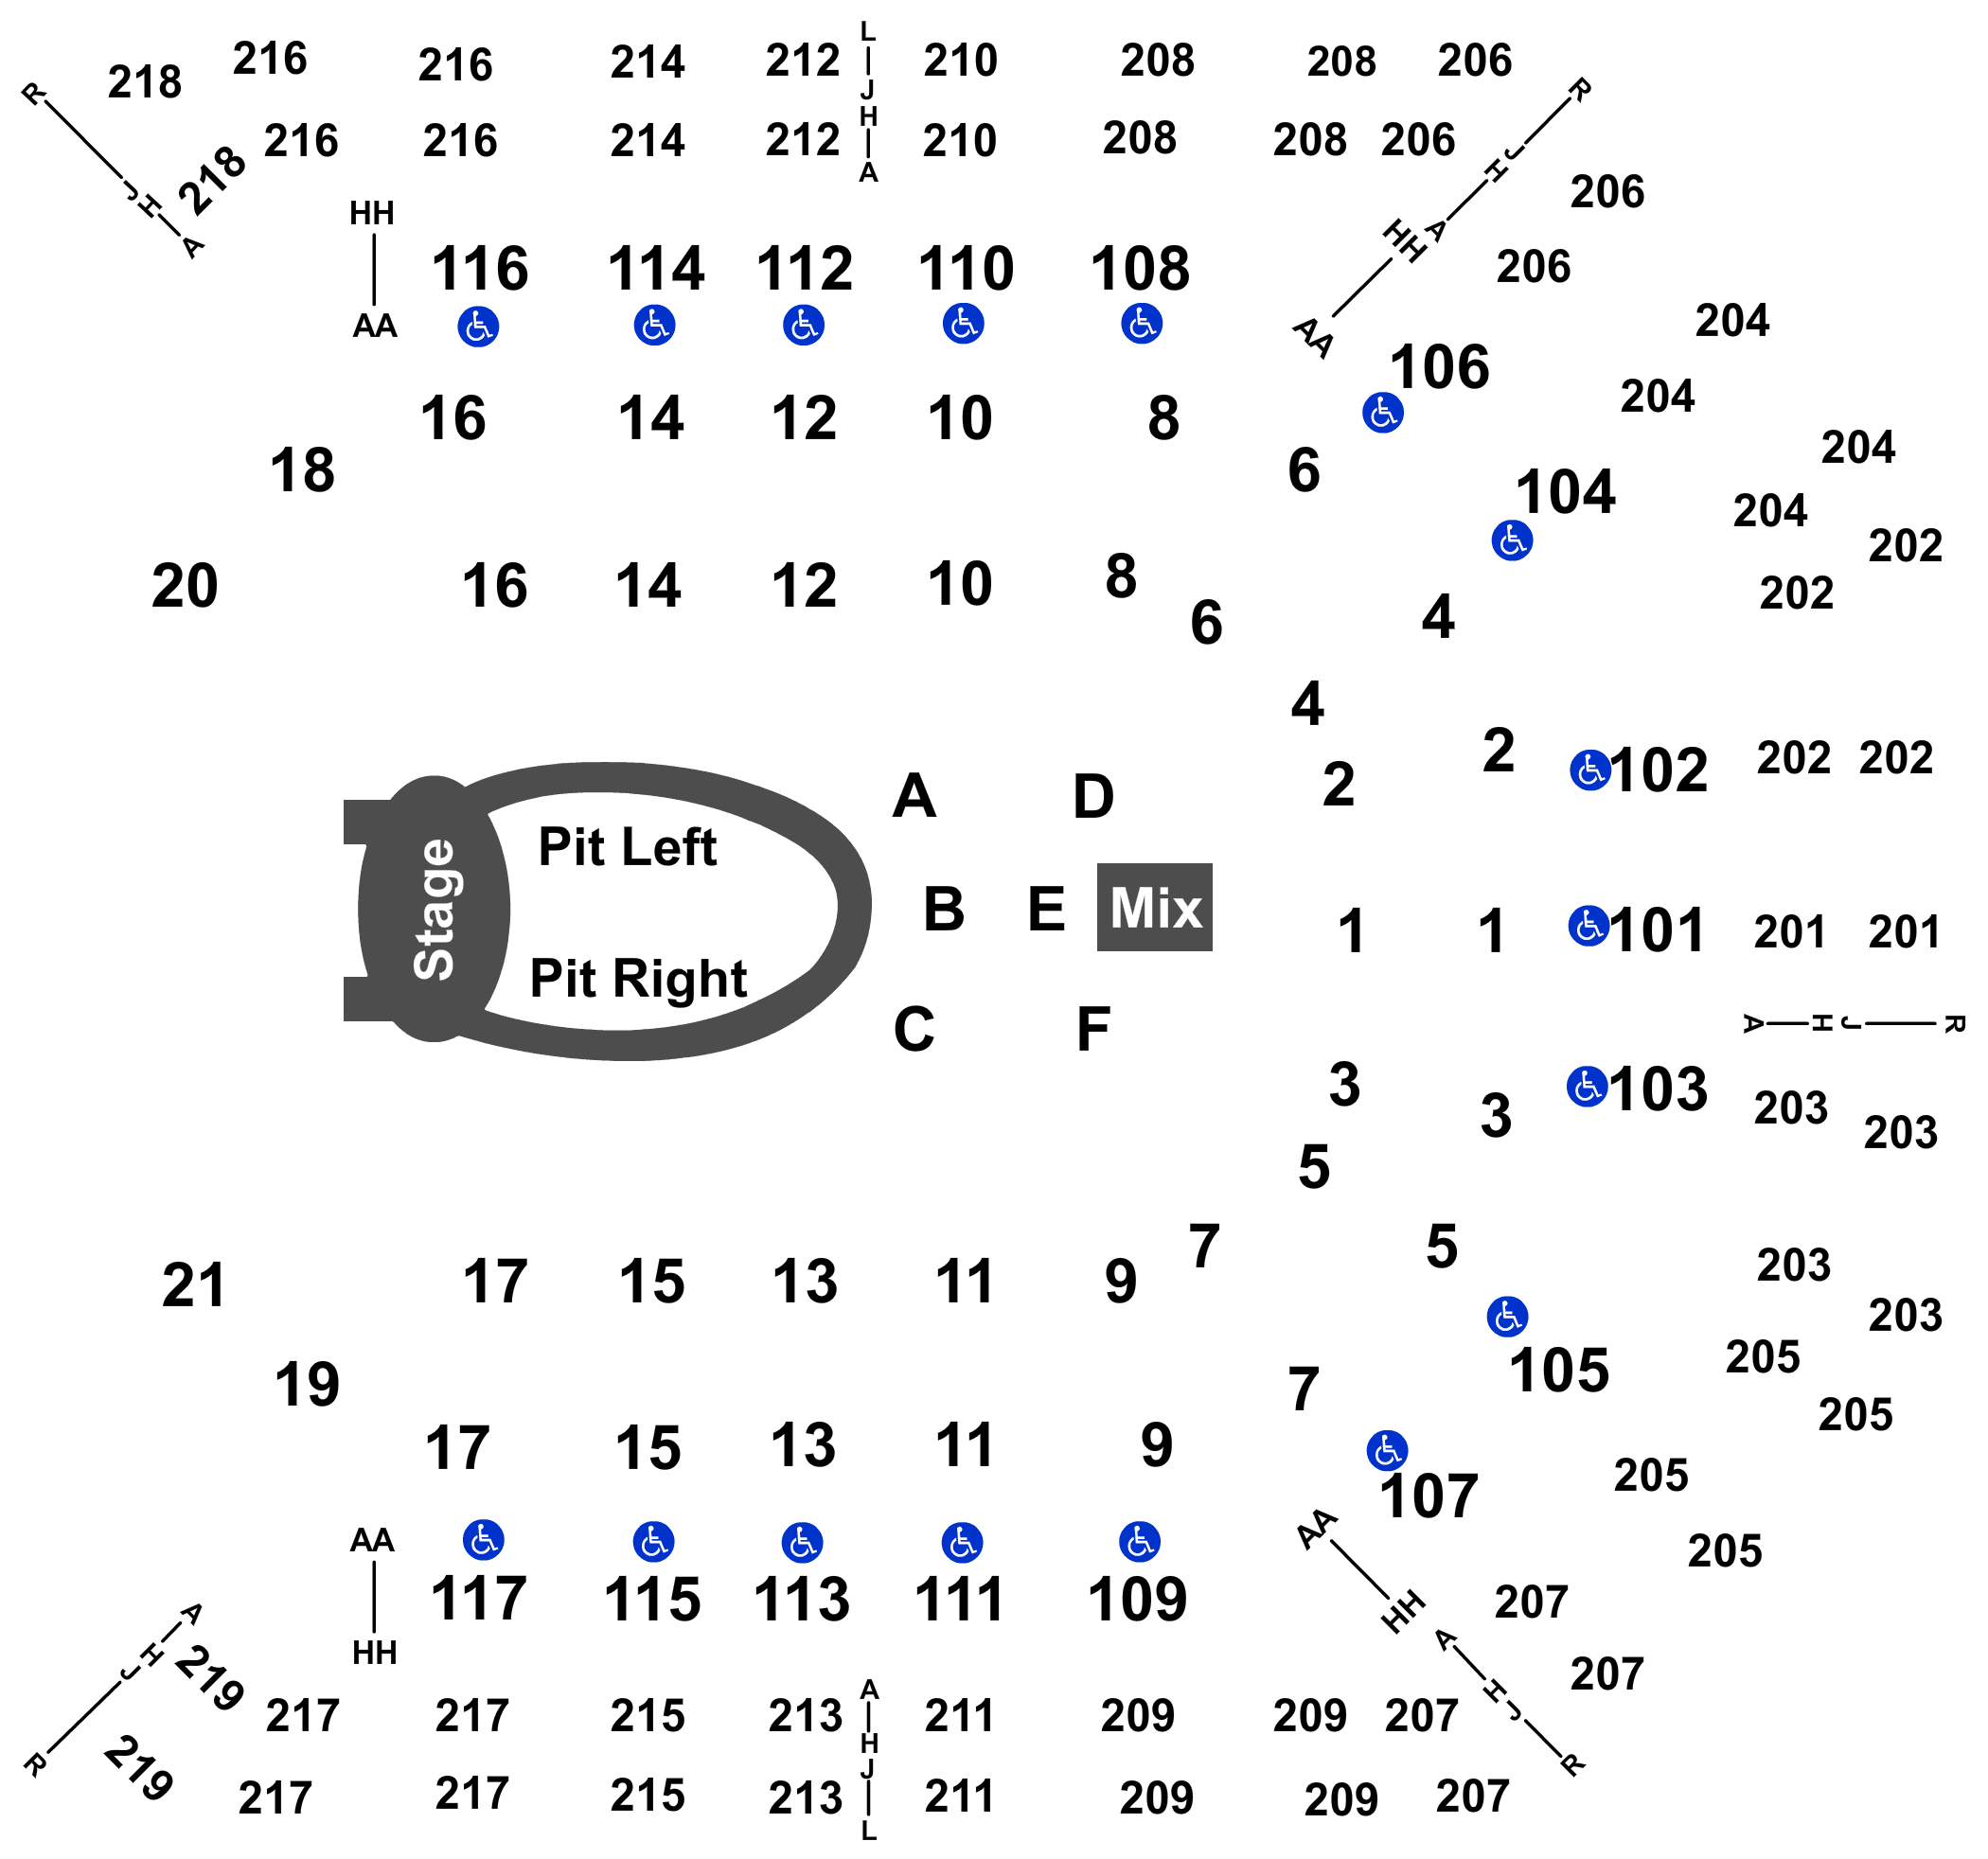 Mgm Garden Arena Seating Chart Rows